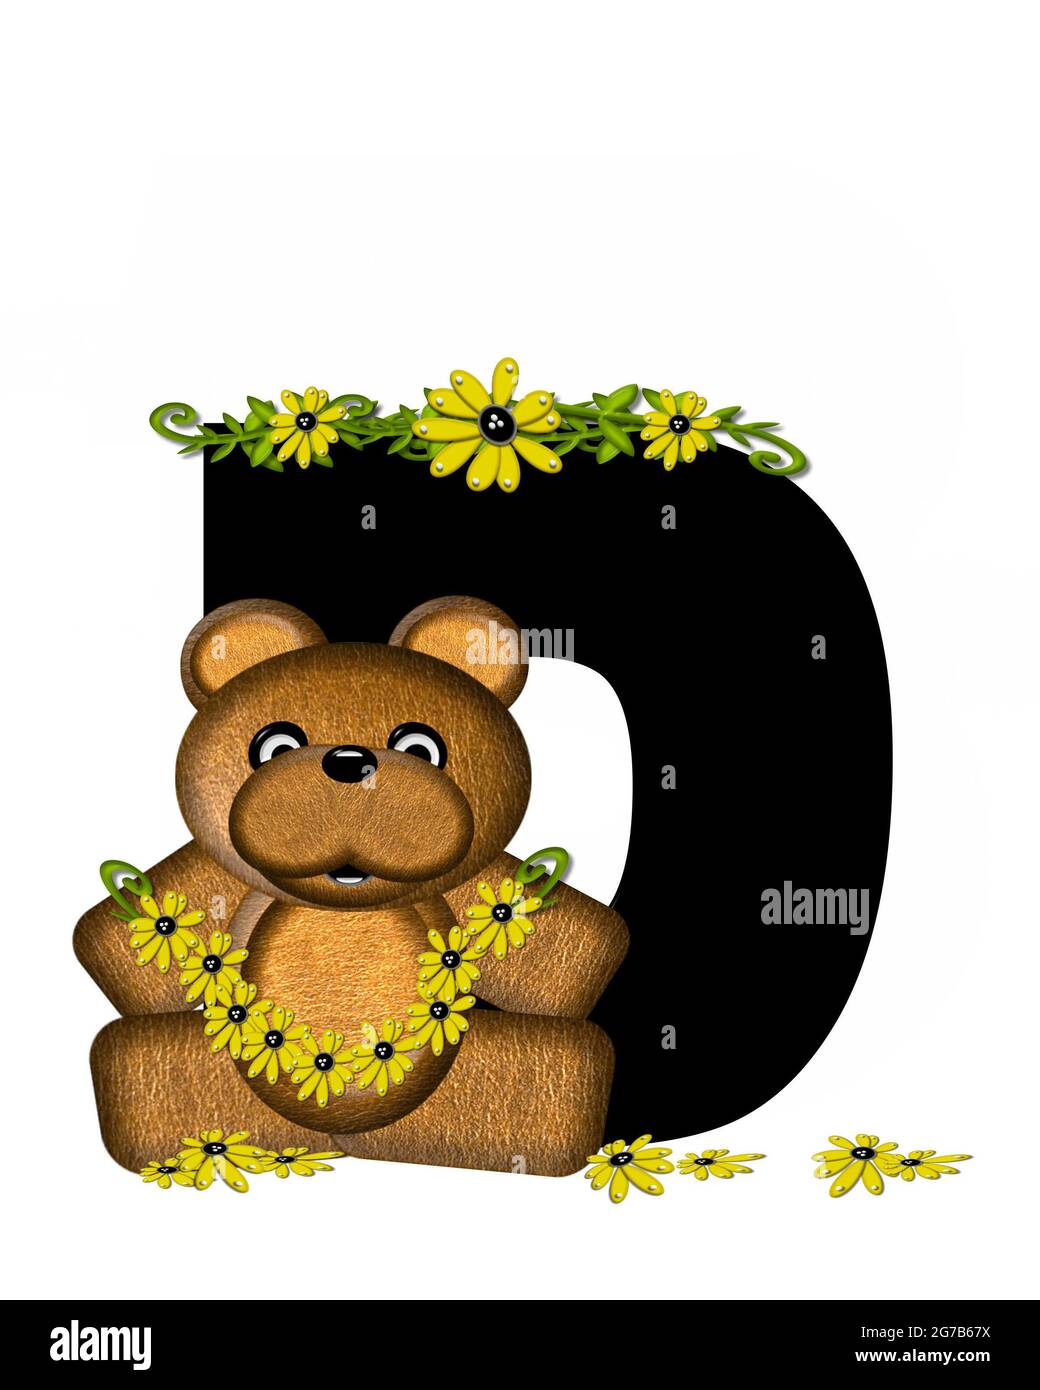 The letter D, in the alphabet set 'Teddy Making Daisy Chain,' is black.  Teddy bear gathers daisies to make yellow daisy chains. Stock Photo